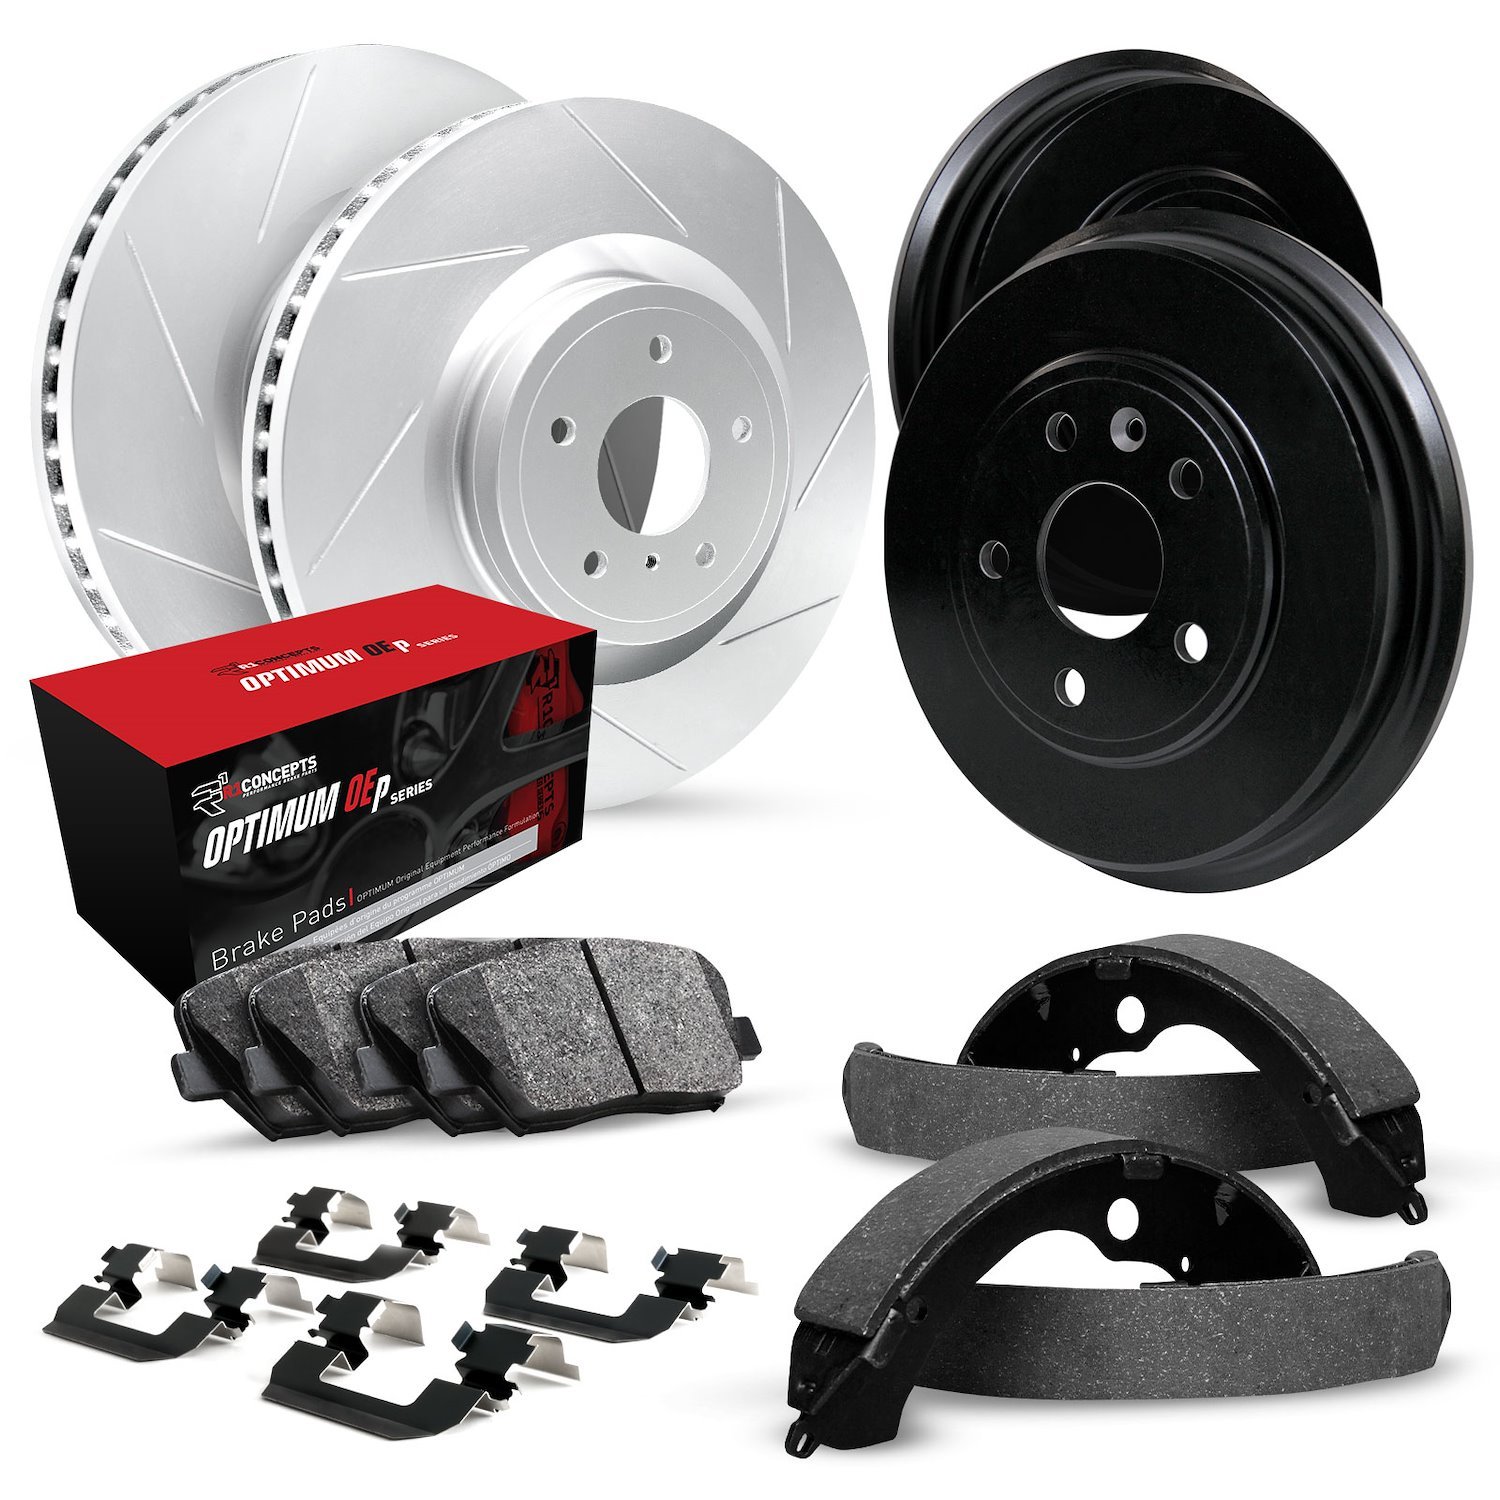 GEO-Carbon Slotted Brake Rotor & Drum Set w/Optimum OE Pads, Shoes, & Hardware, 1995-1996 Ford/Lincoln/Mercury/Mazda